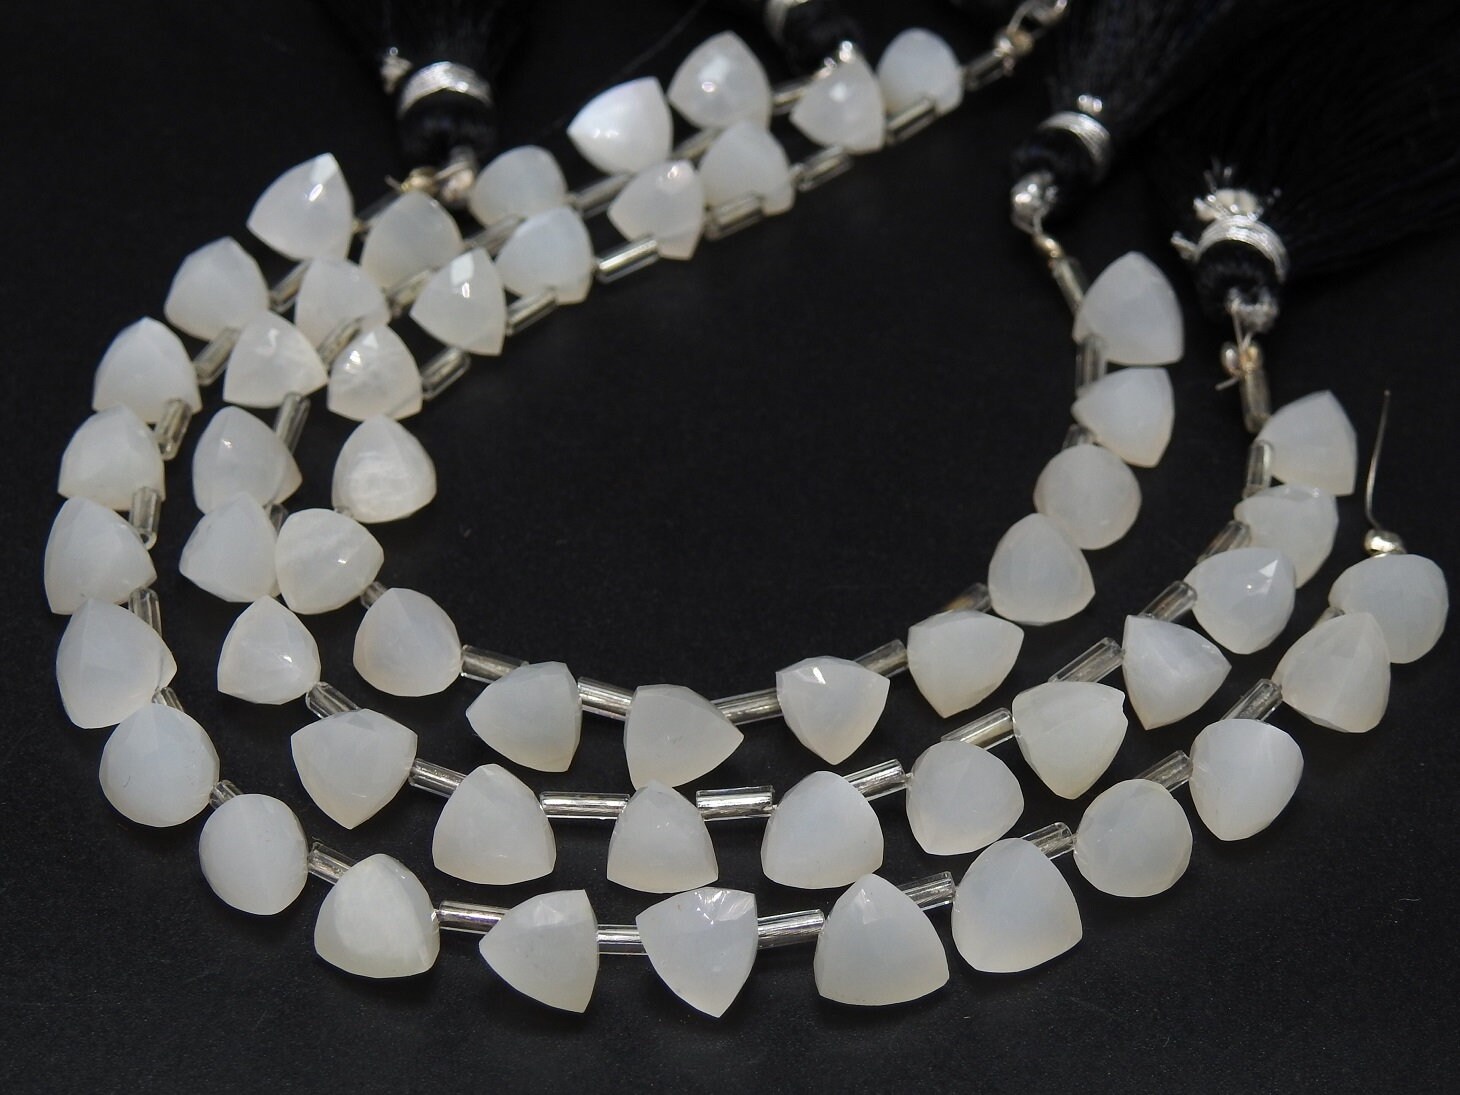 10Piece Strand,Natural White Moonstone Micro Faceted Trillions,Triangle,Drop,Briolettes,Wholesaler,Supplies 7X7MM Approx PME-BR2 | Save 33% - Rajasthan Living 12